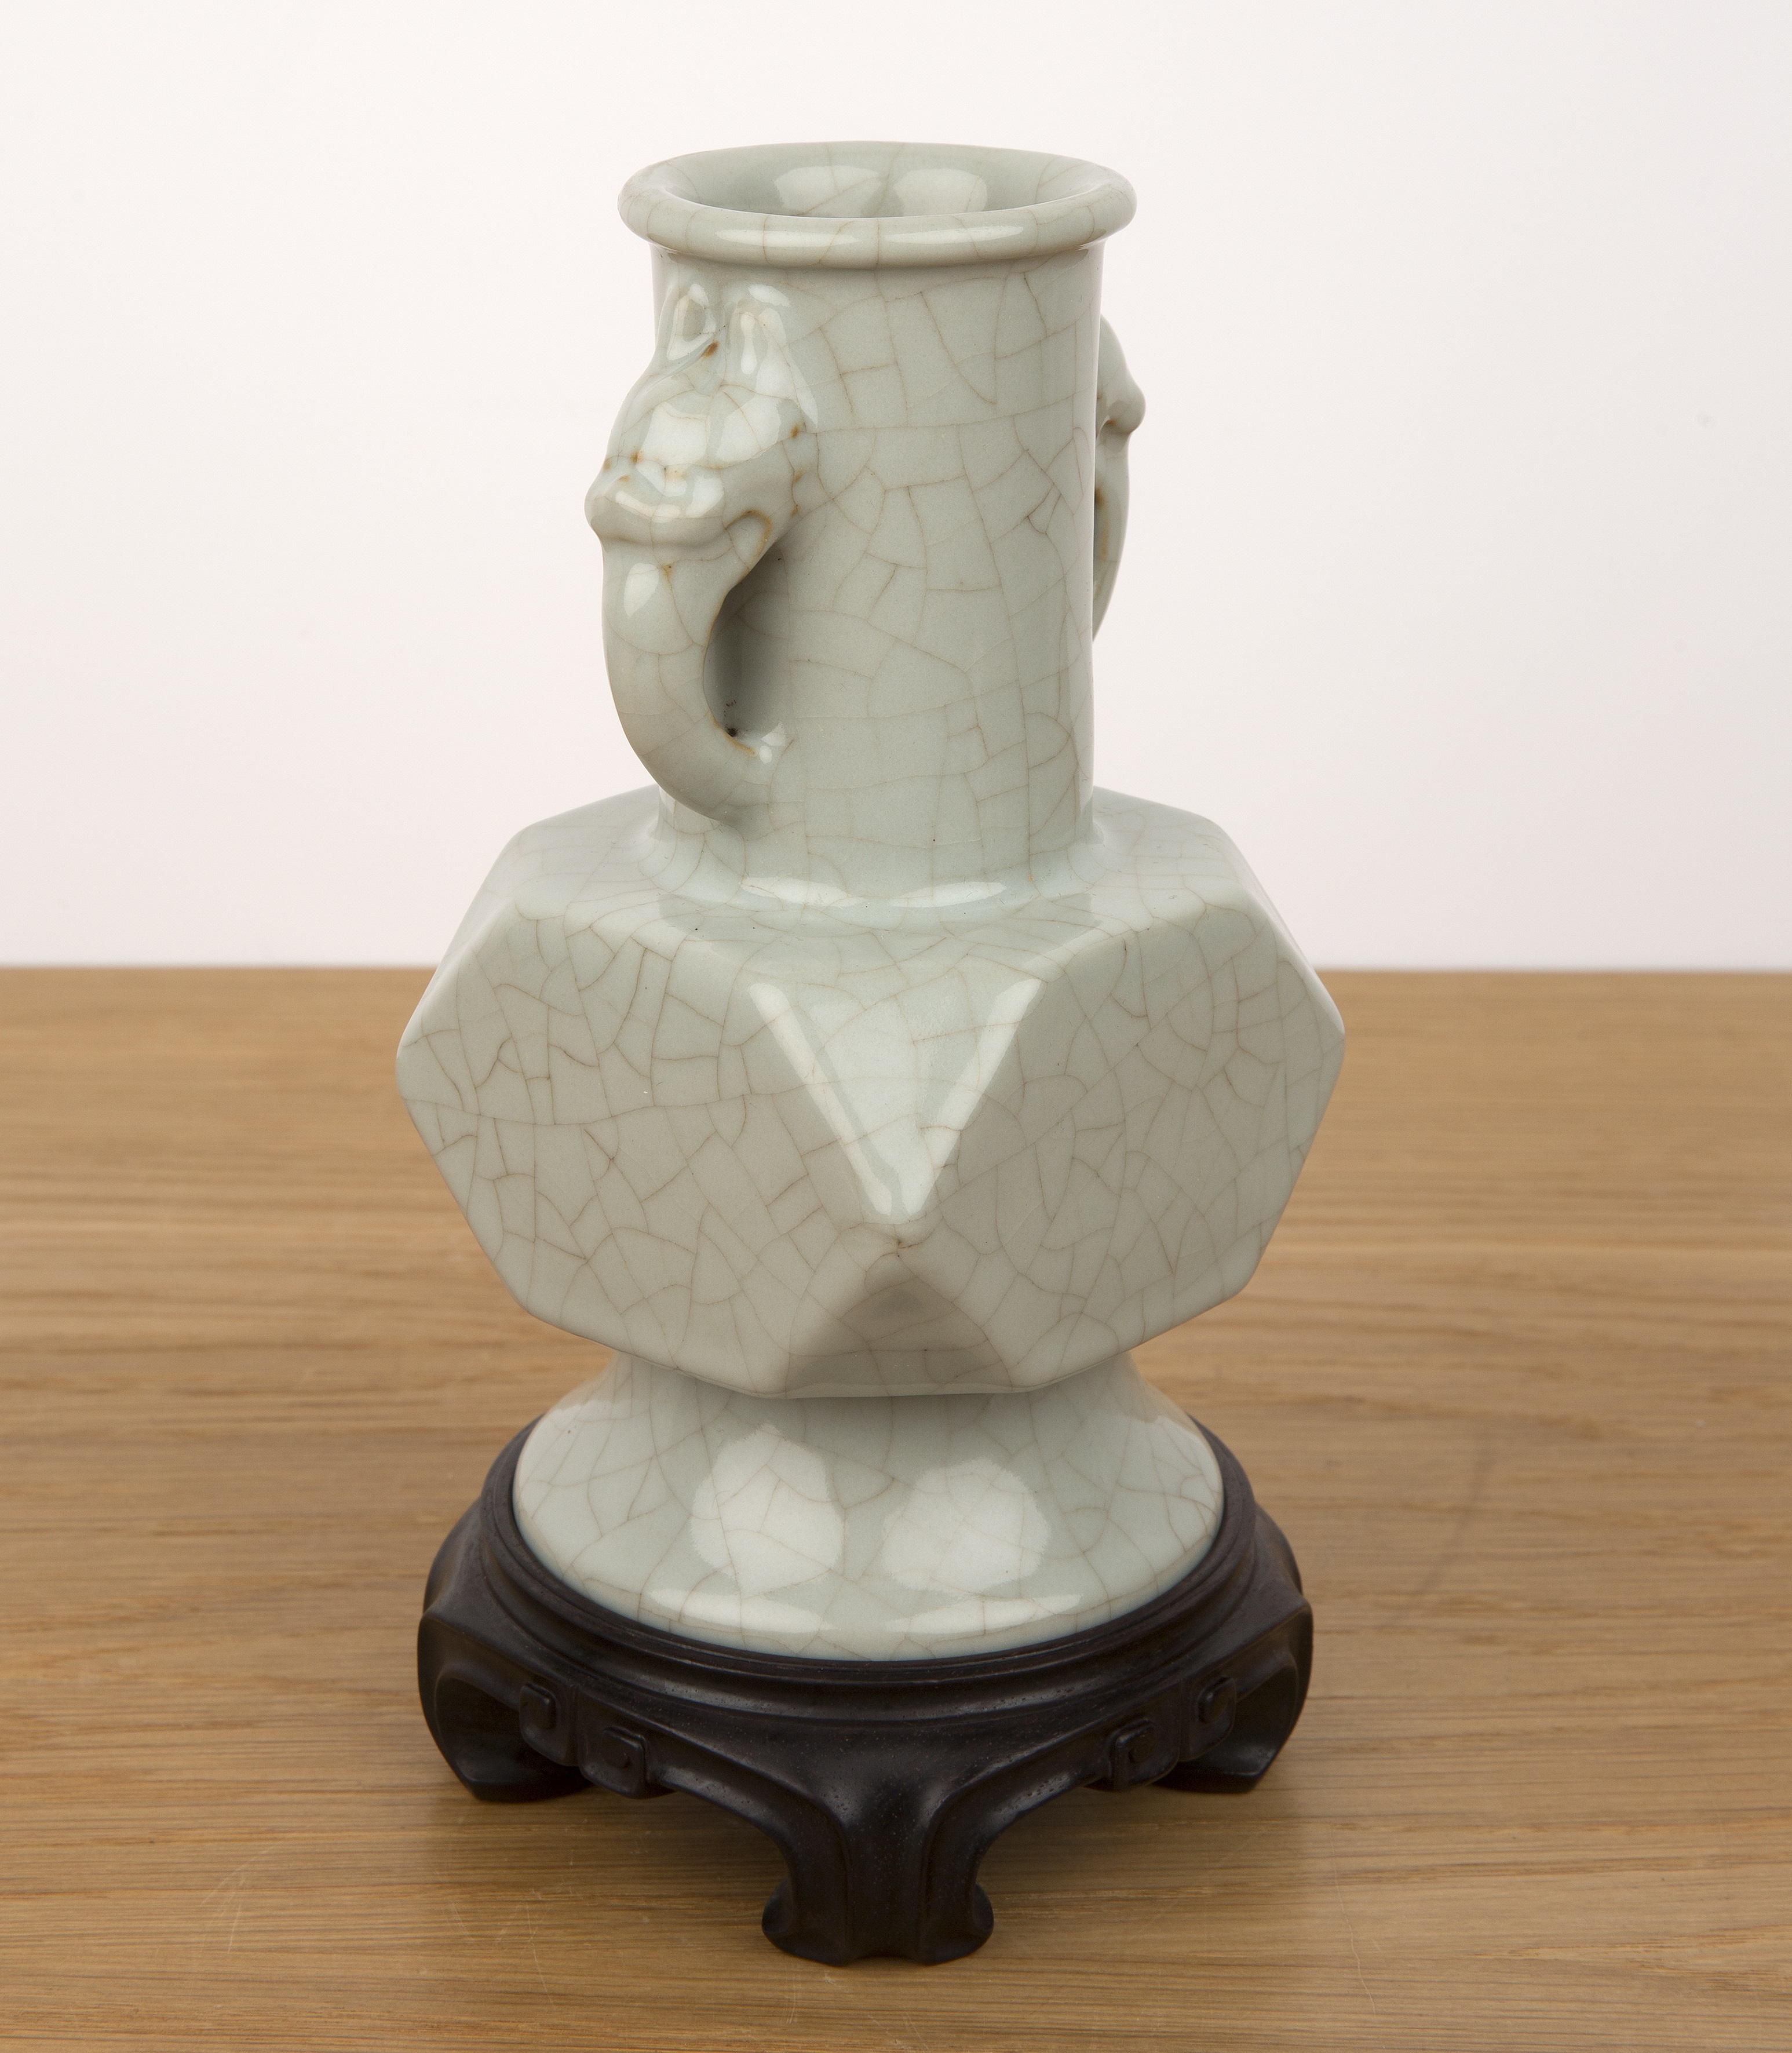 Archaic bronze form celadon vase Chinese with mask head handles, crackle glaze, and canted body - Image 3 of 17